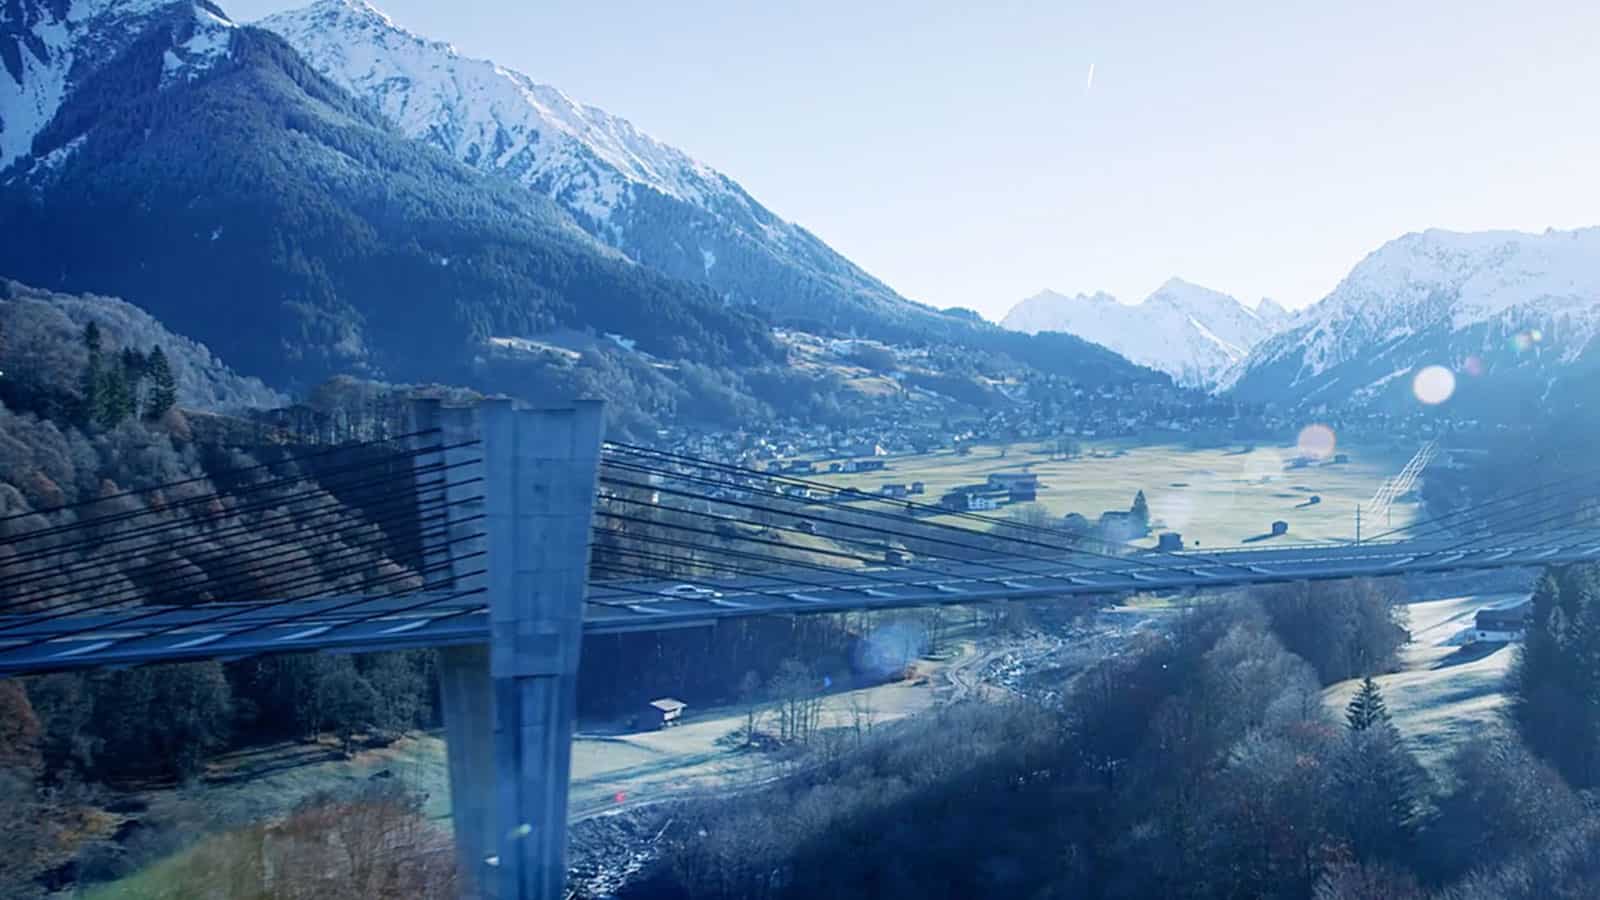 Video still of mountainous area, with bridge in the foreground.